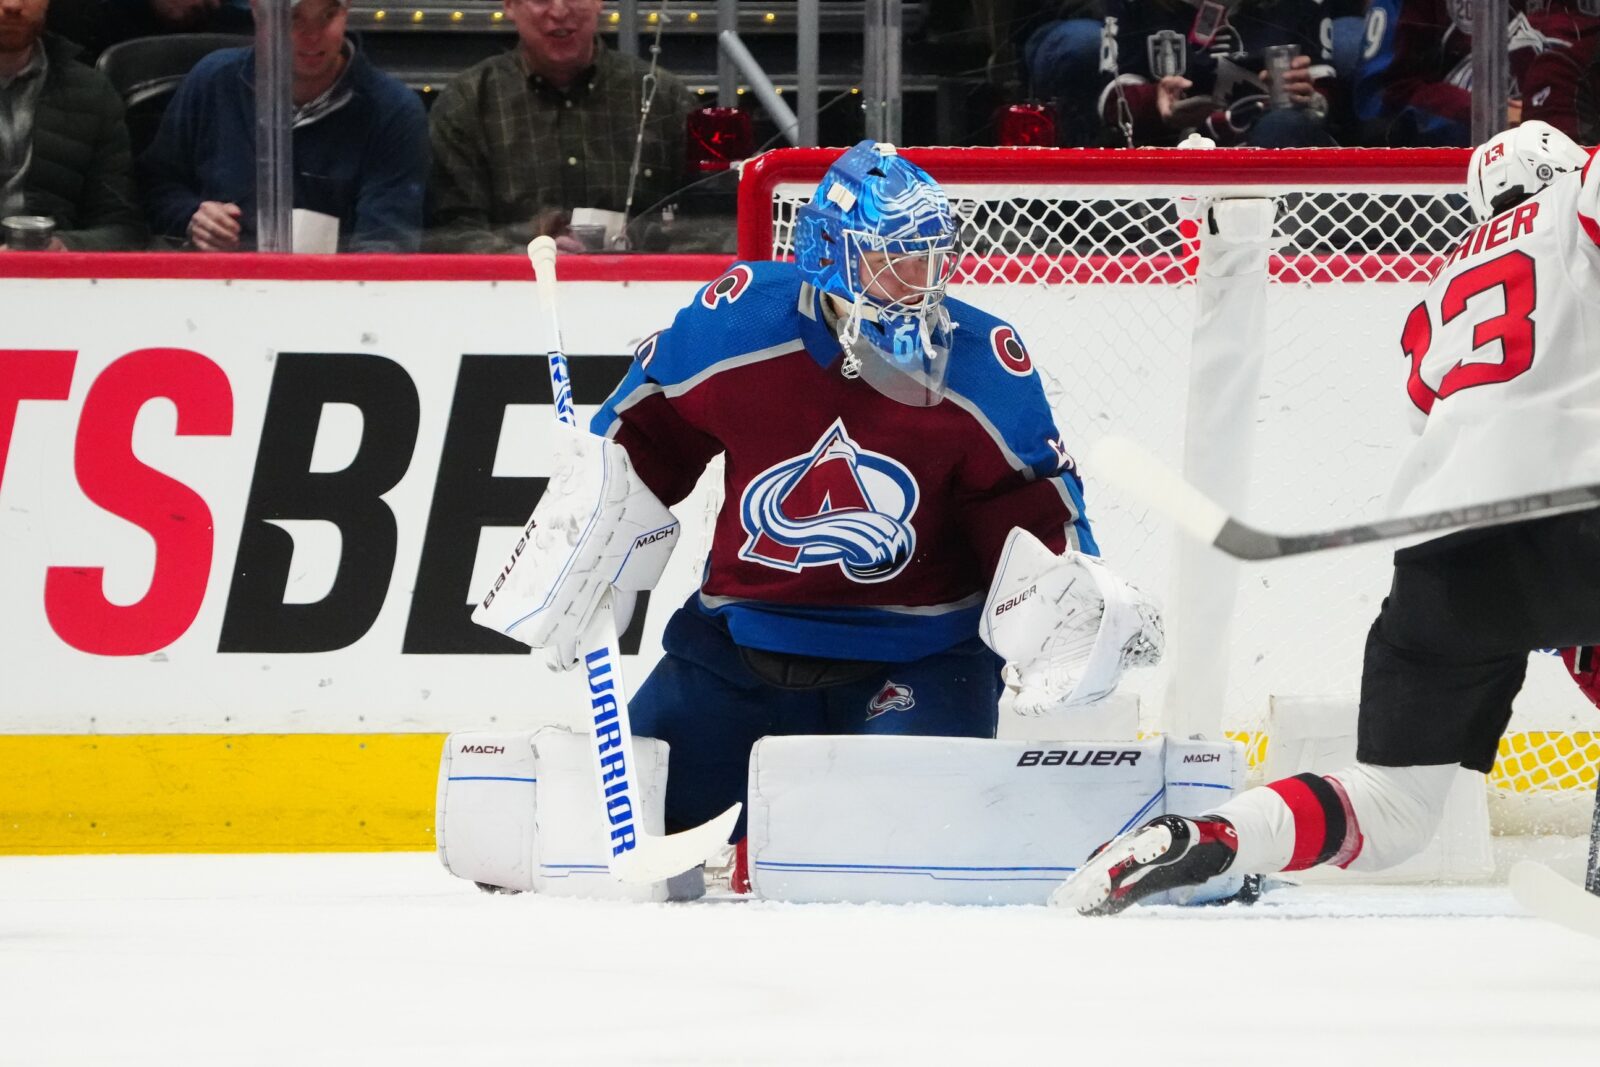 Vitek Vanecek Earns Shutout as New Jersey Devils Defeat the Colorado  Avalanche, 1-0 - All About The Jersey